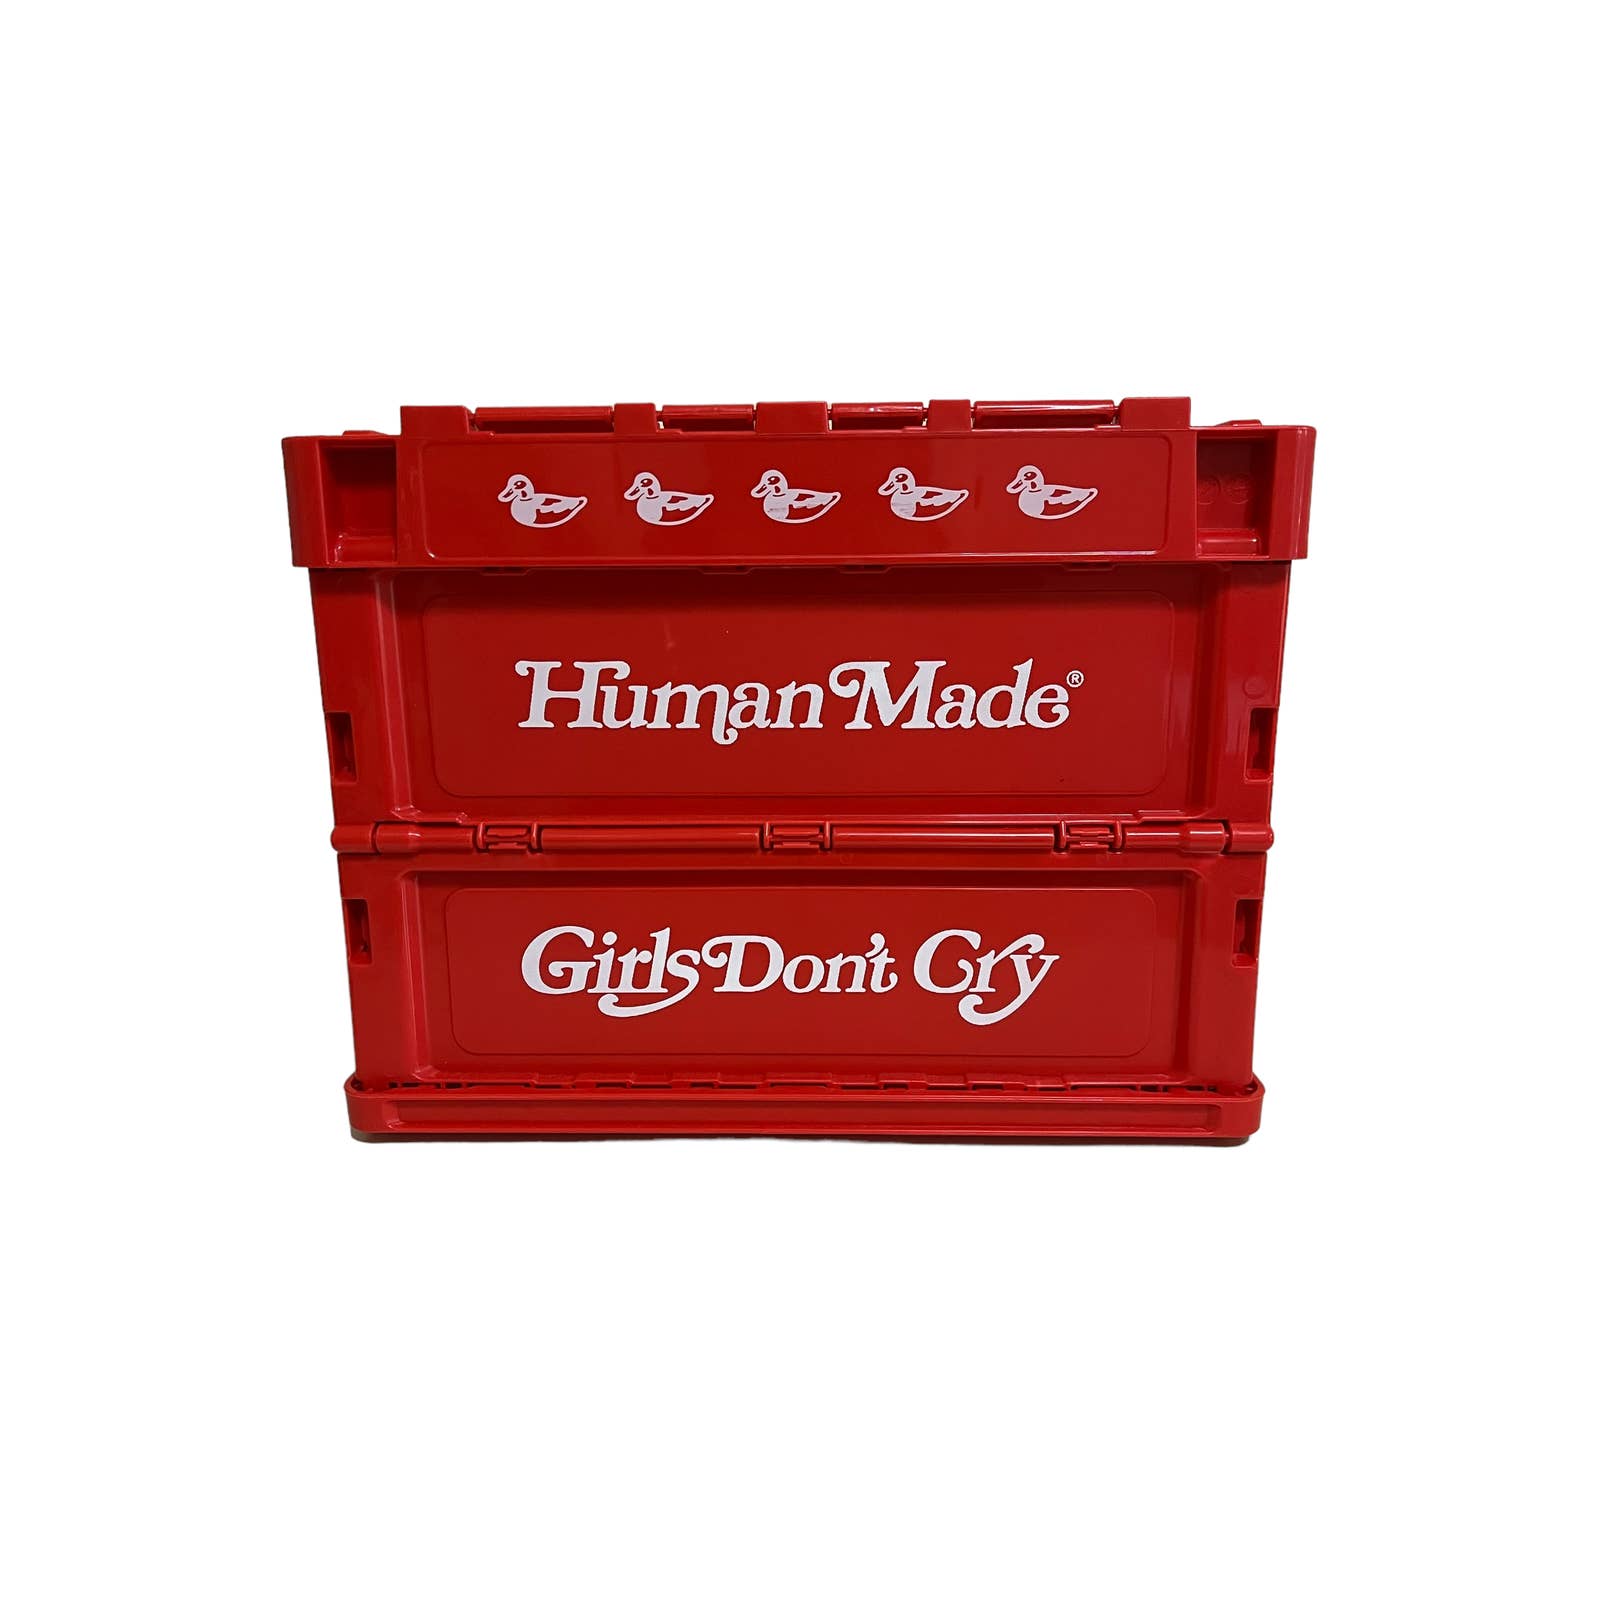 girlsHUMAN MADE Girls Don't Cry CONTAINER 74L